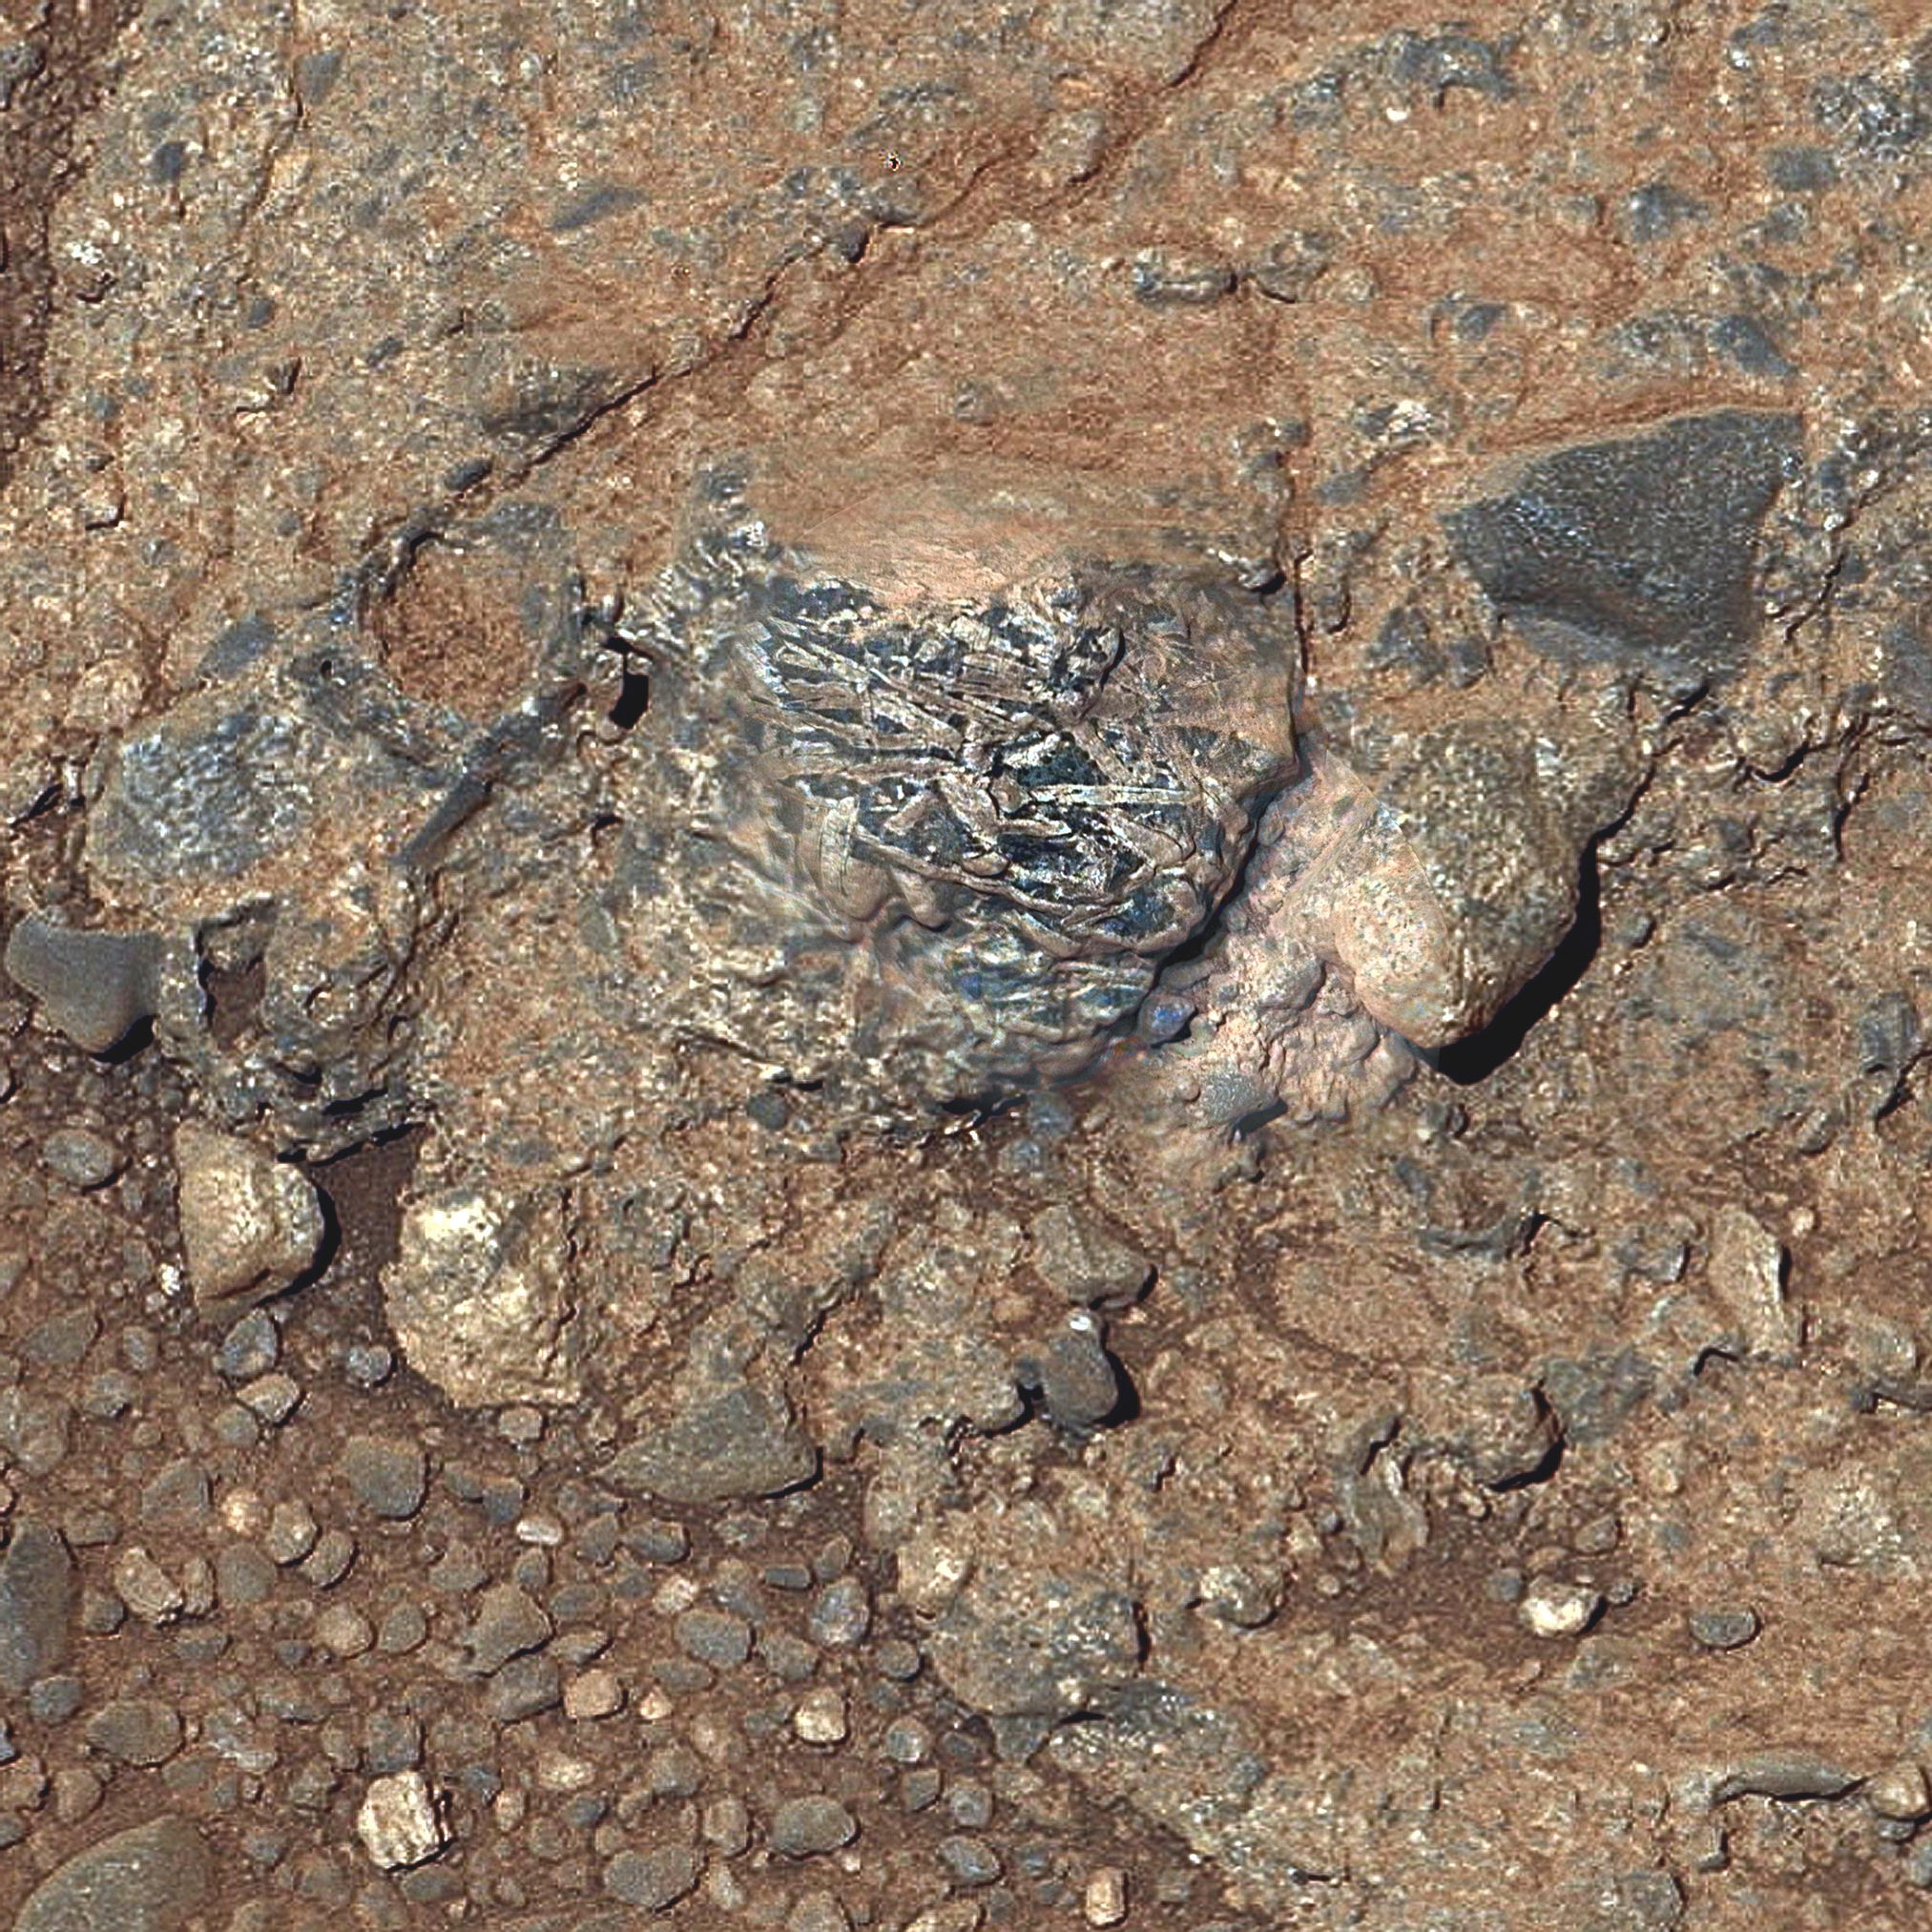 This view of a Martian rock target called "Harrison" merges images from two cameras on NASA's Curiosity Mars rover to provide both color and microscopic detail.